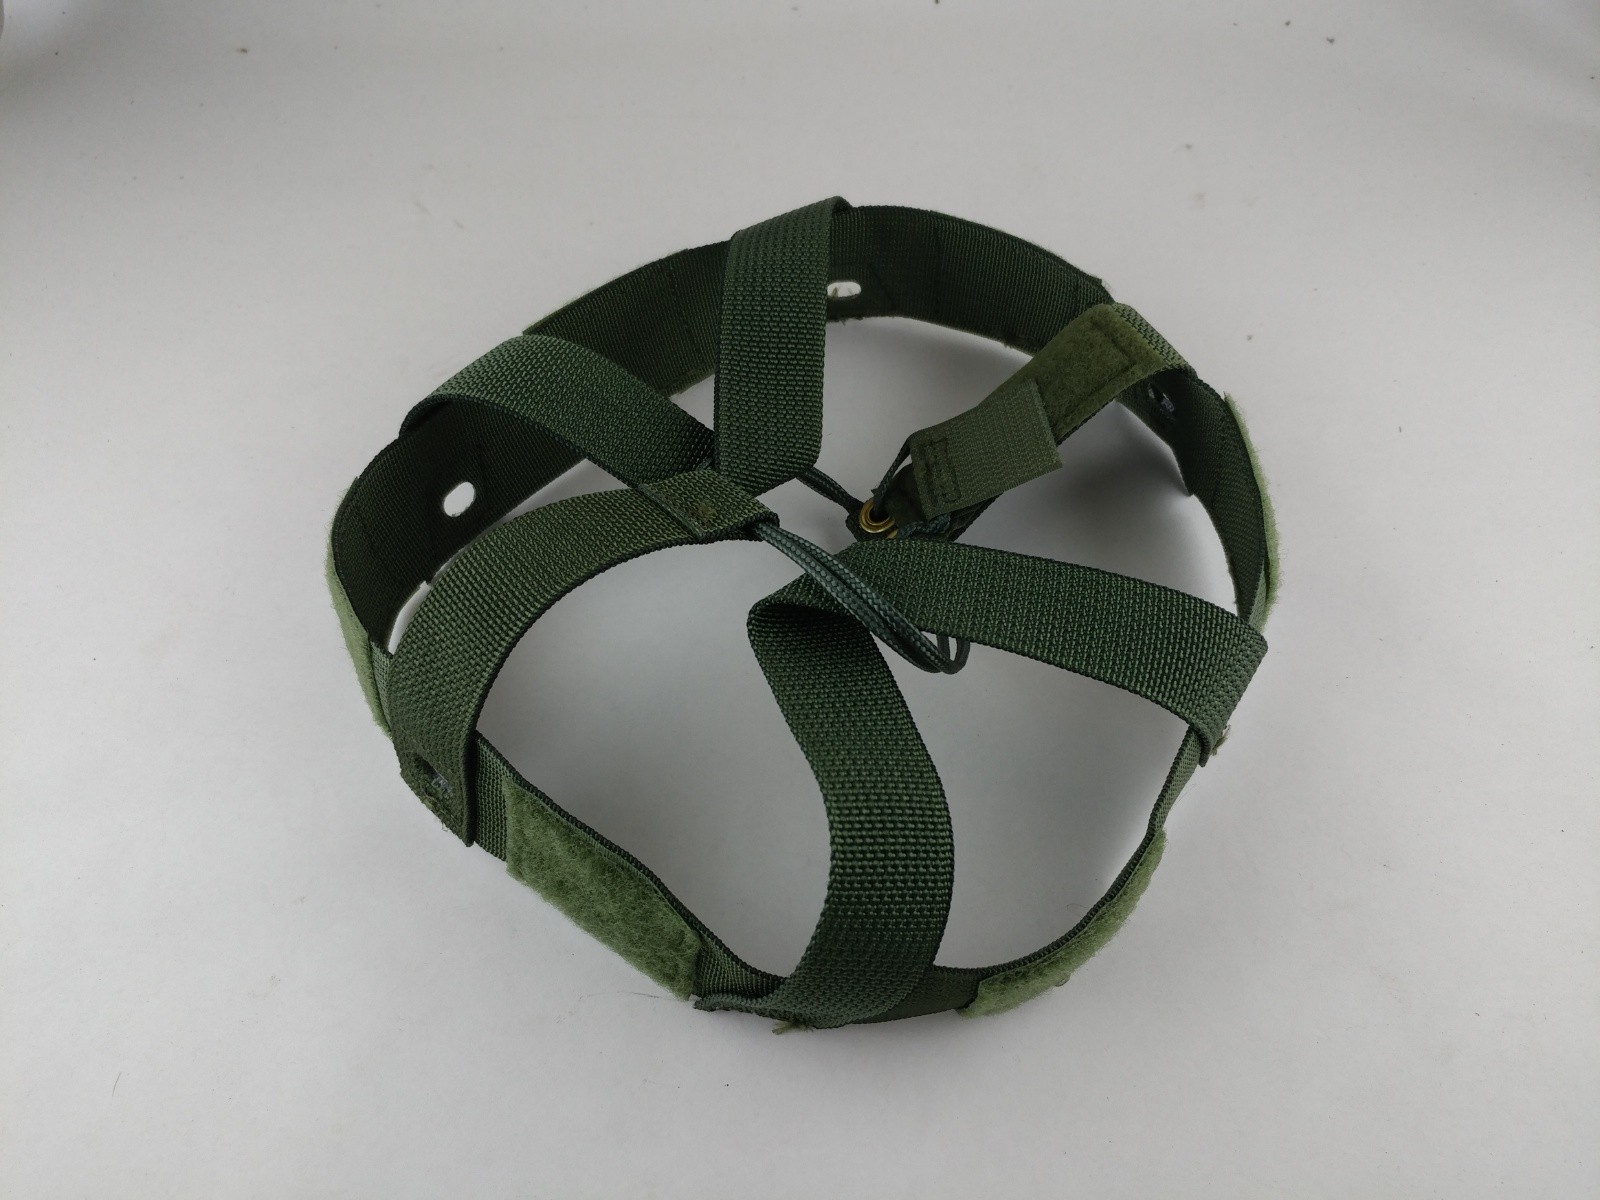 NEW US MILITARY PASGT HELMET ADJUSTABLE SUSPENSION ASSEMBLY GREEN SIZE SMALL